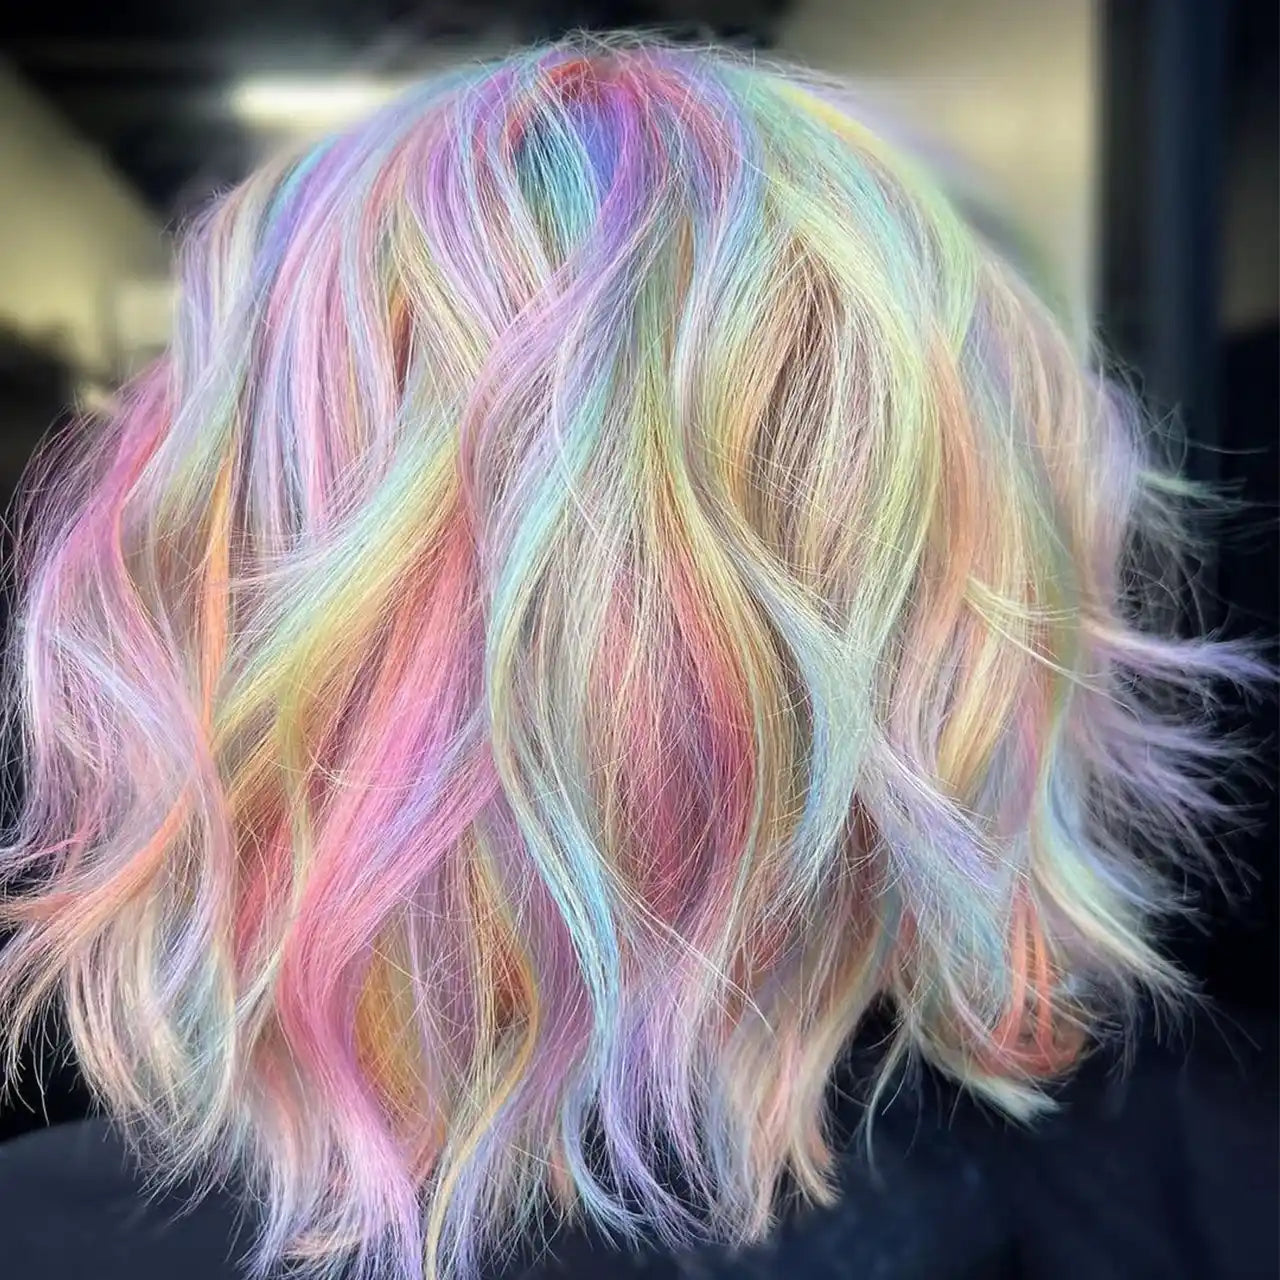 Rainbow hair has the richest color expression